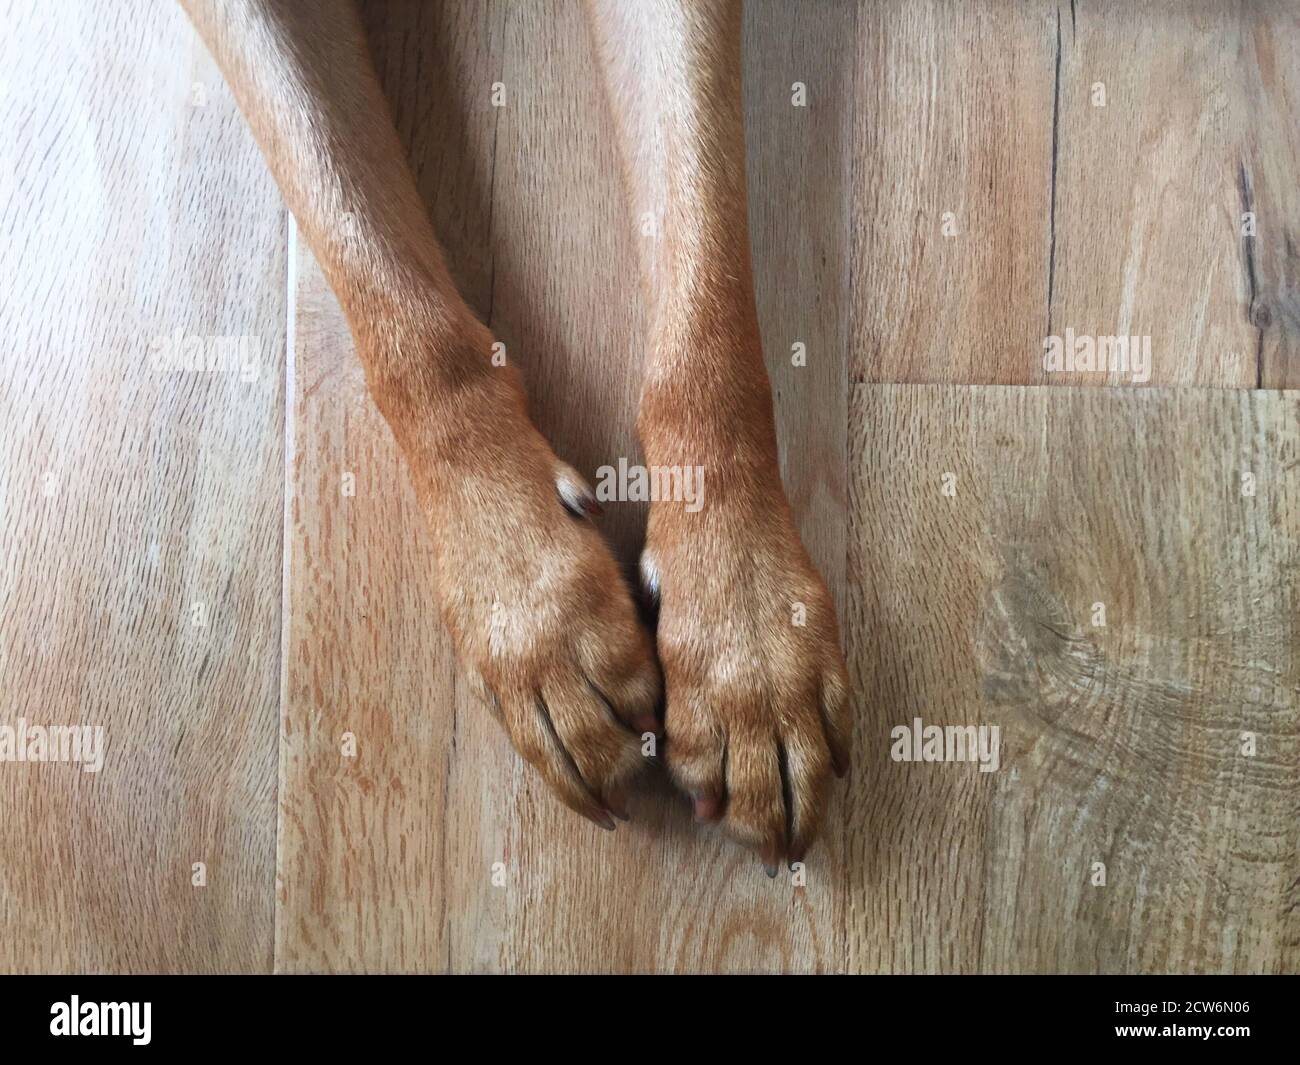 looking down from above onto the outstretched legs and paws of a pet dog showing bones and joints anatomy with copy space Stock Photo